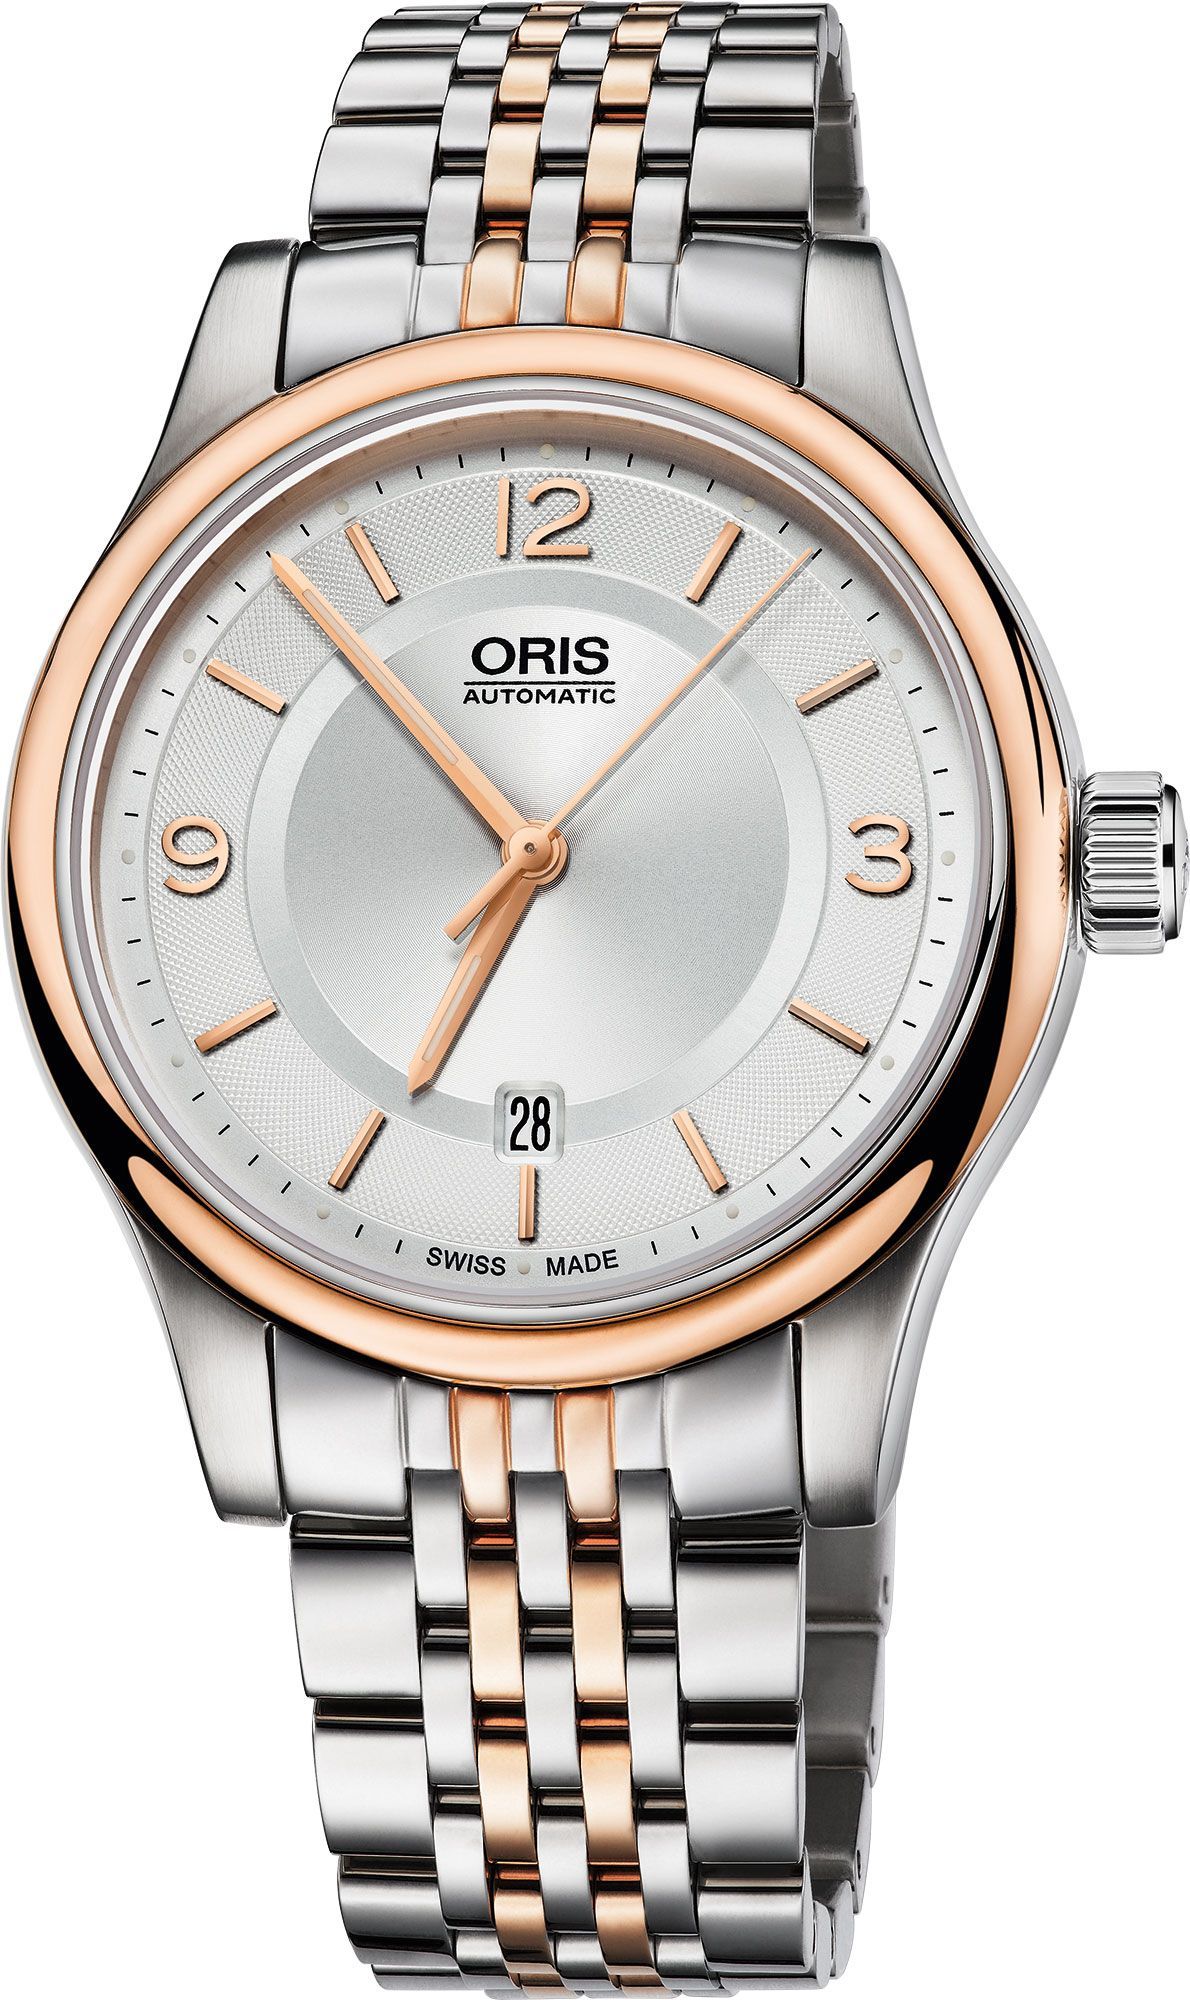 Oris Culture Classic Date Silver Dial 42 mm Automatic Watch For Men - 1